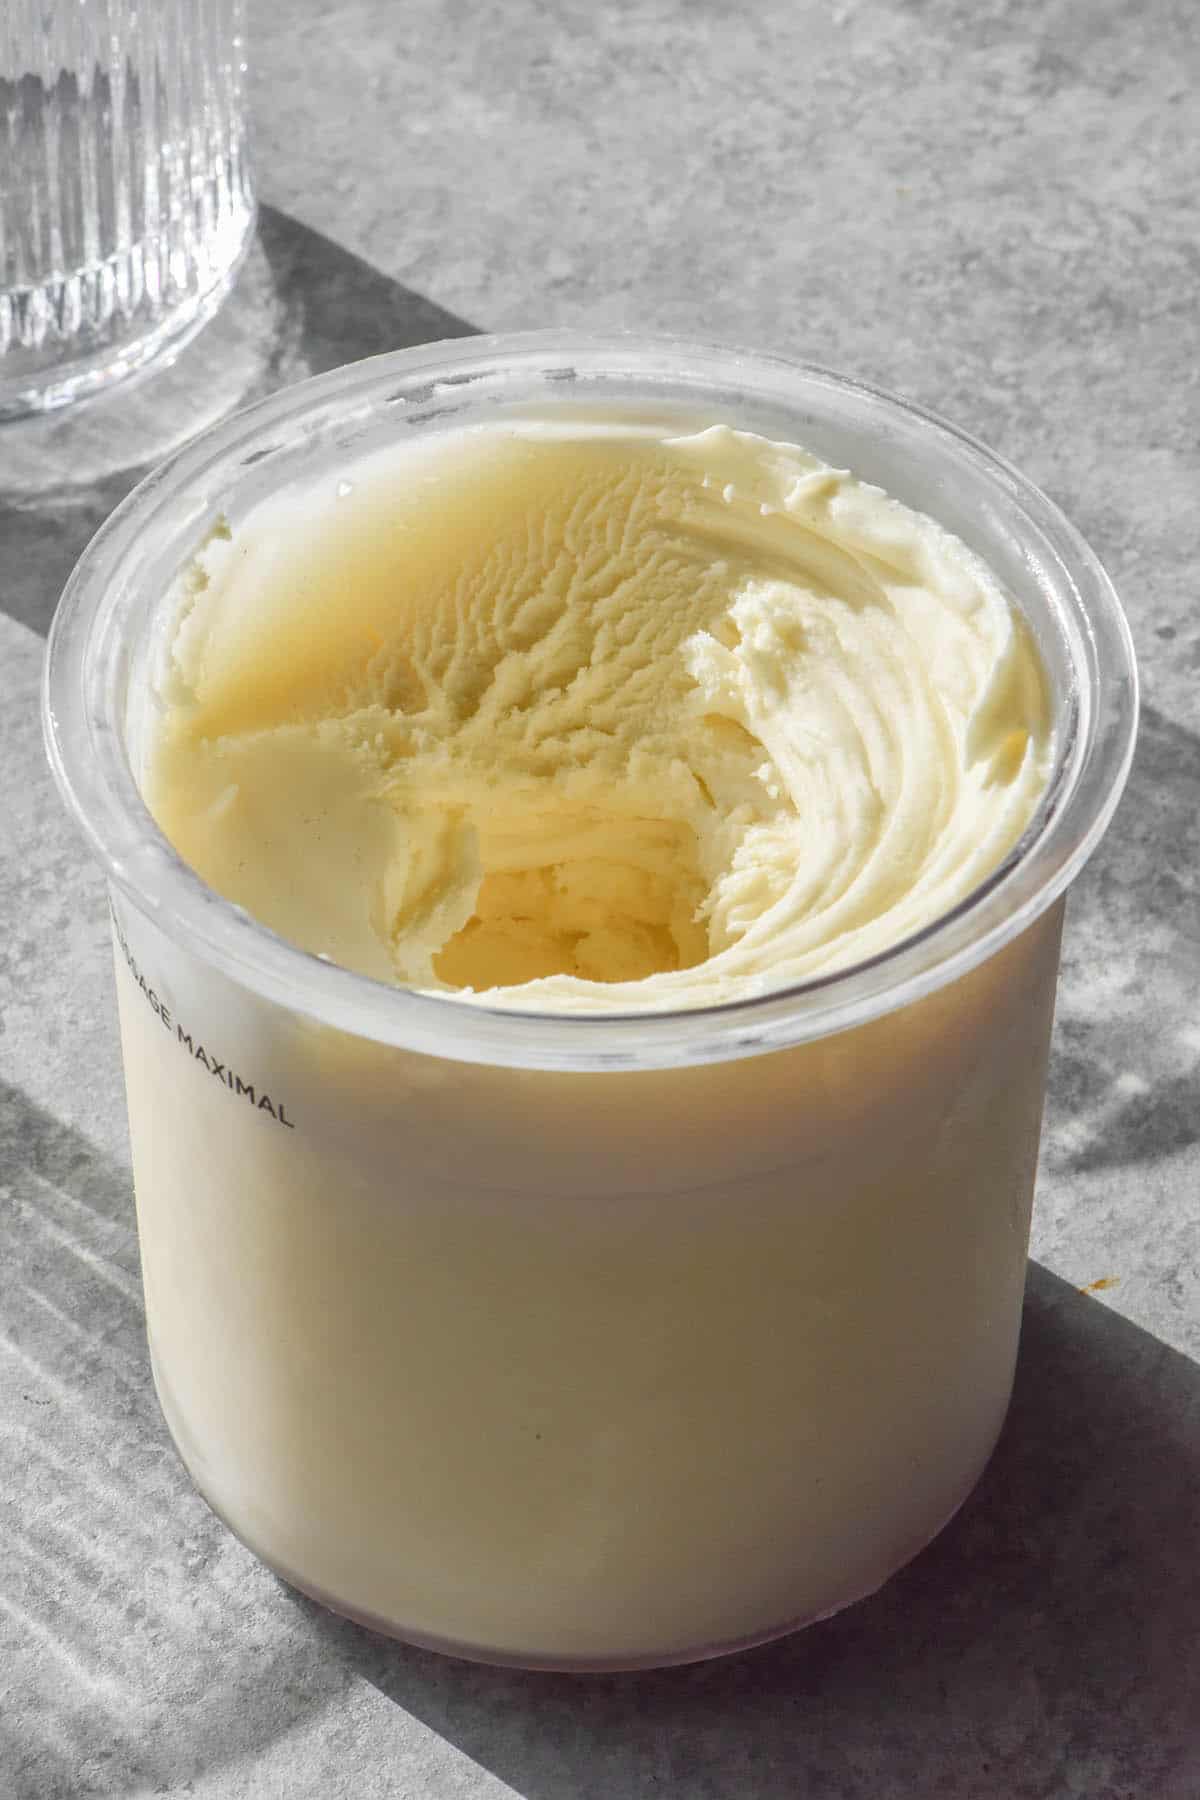 A side on image of a tub of Vanilla Ninja Creami on a concrete backdrop. Sunlit glasses of water sit to the top left of the image